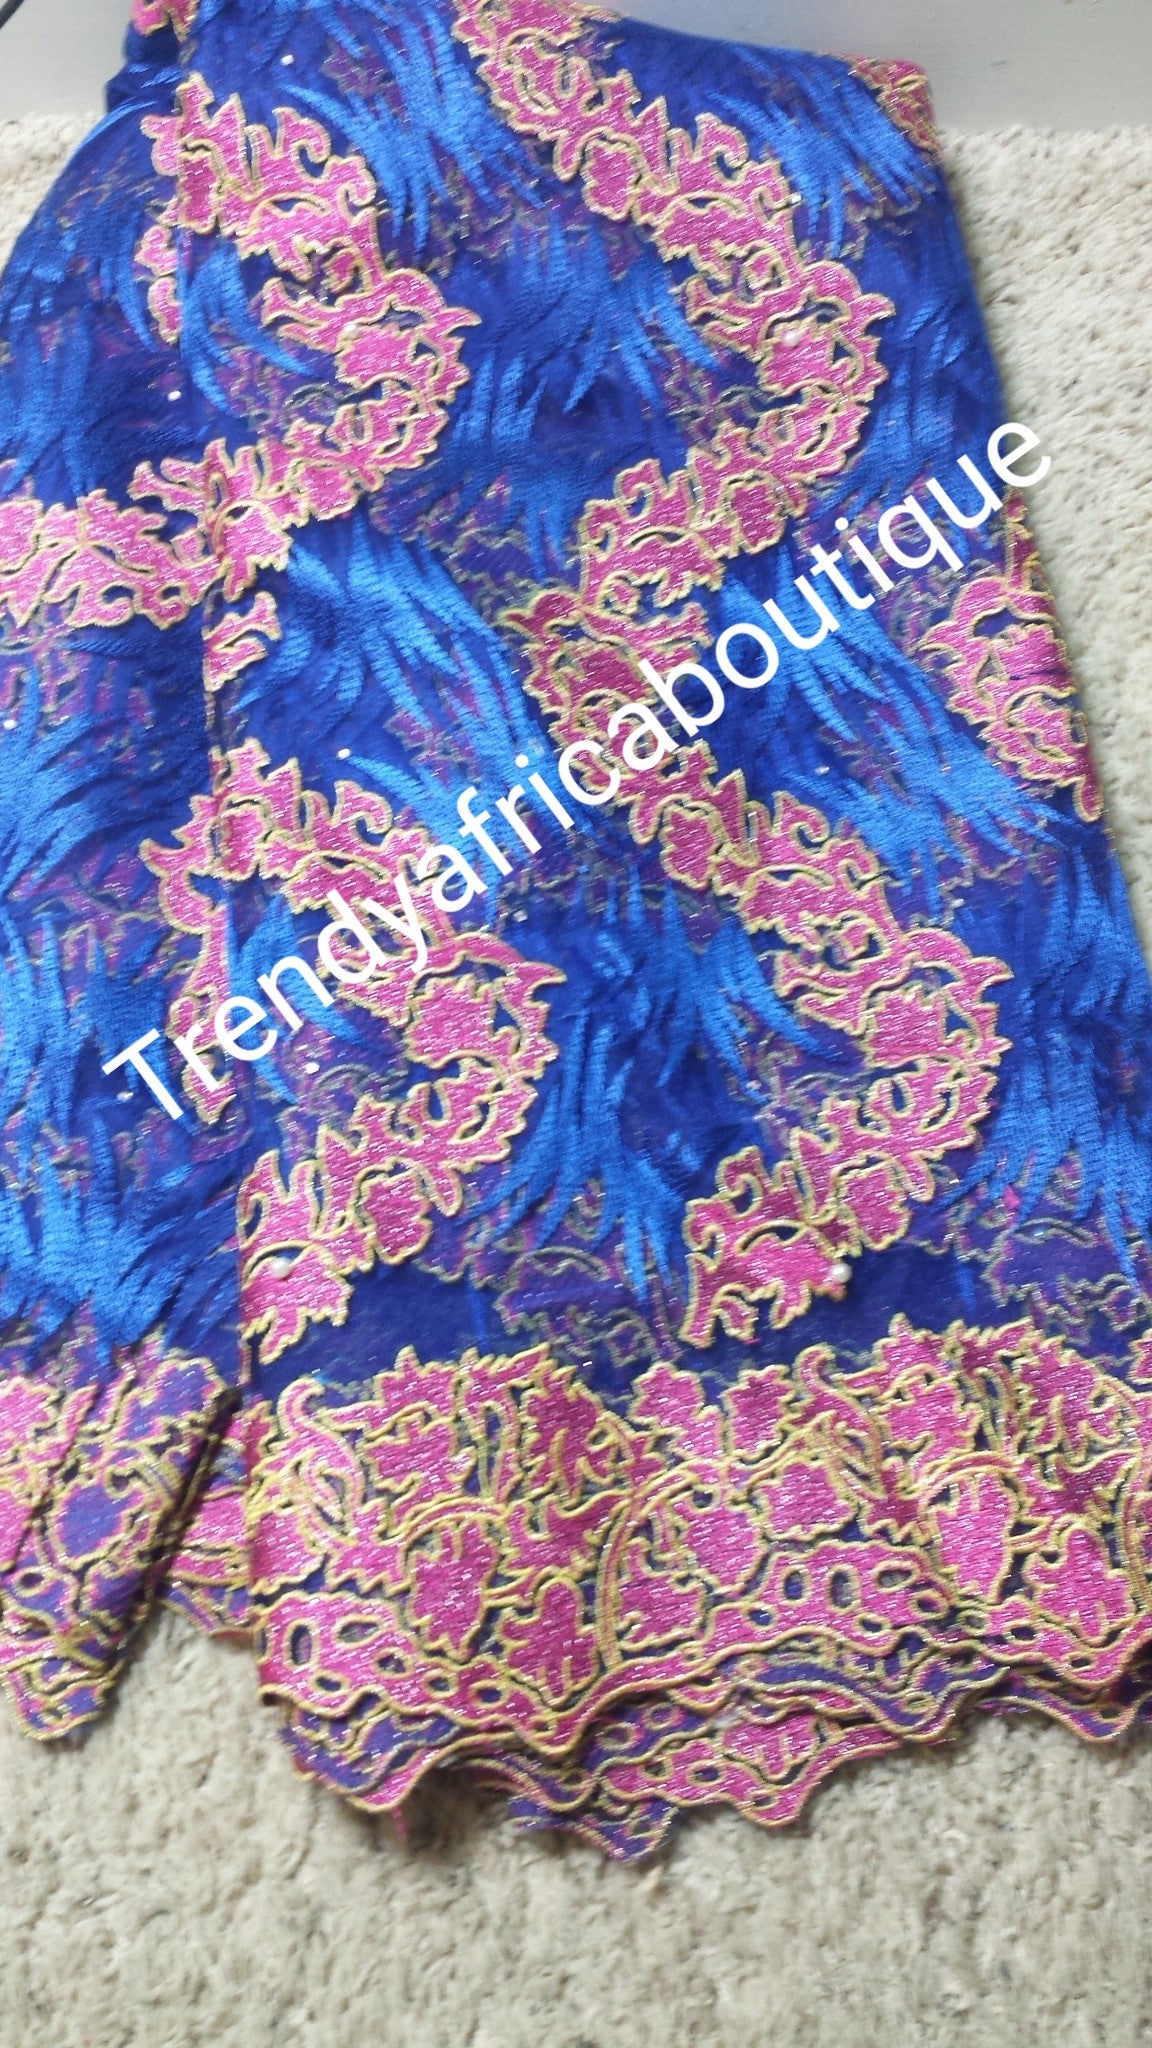 Royal blue /pink. French lace fabric for making African party dress. Sold as 5yds lenght.